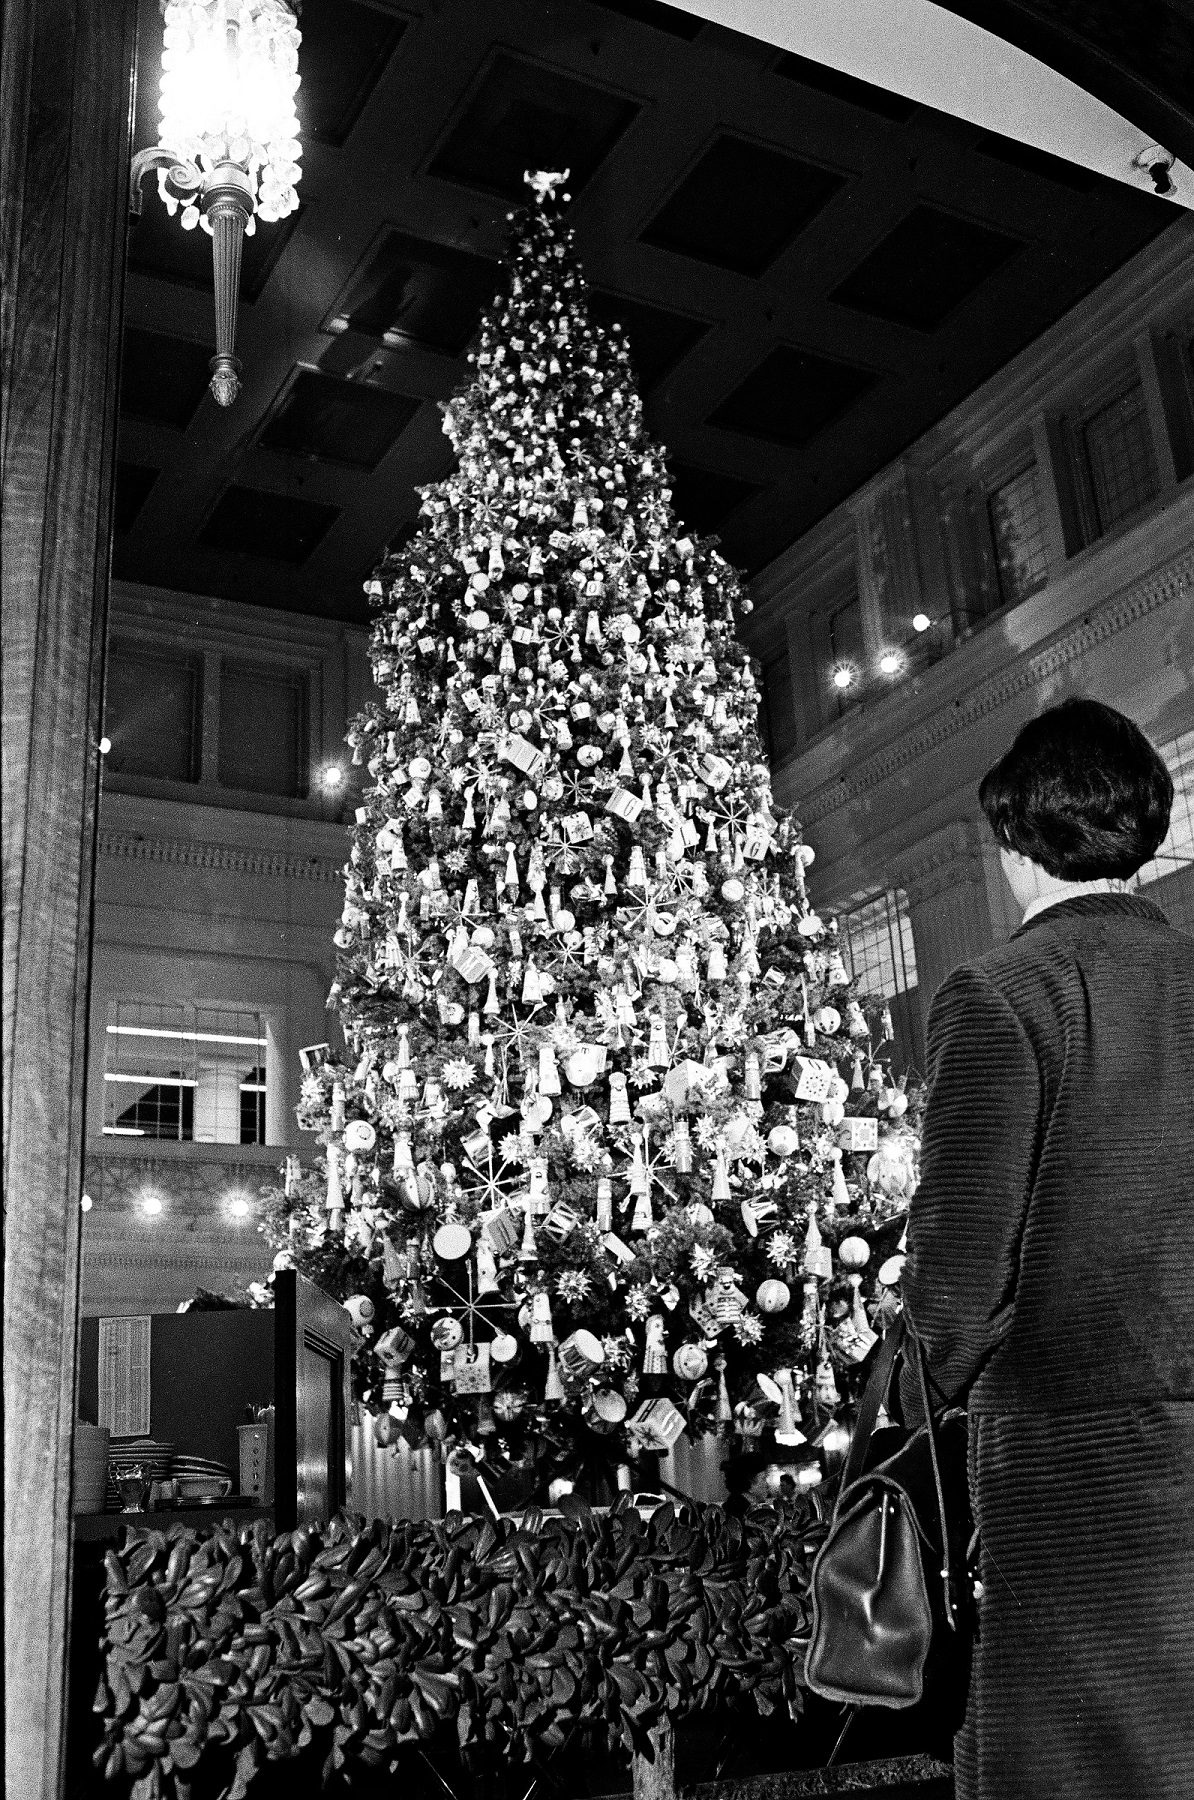 A black & white photograph of a Christmas tree in a tall, large atrium. In the right foreground is the back of a woman gazing at the tree. She has short, cropped hair and is wearing a coat & carrying a handbag. The tree is full of lights & ornaments.